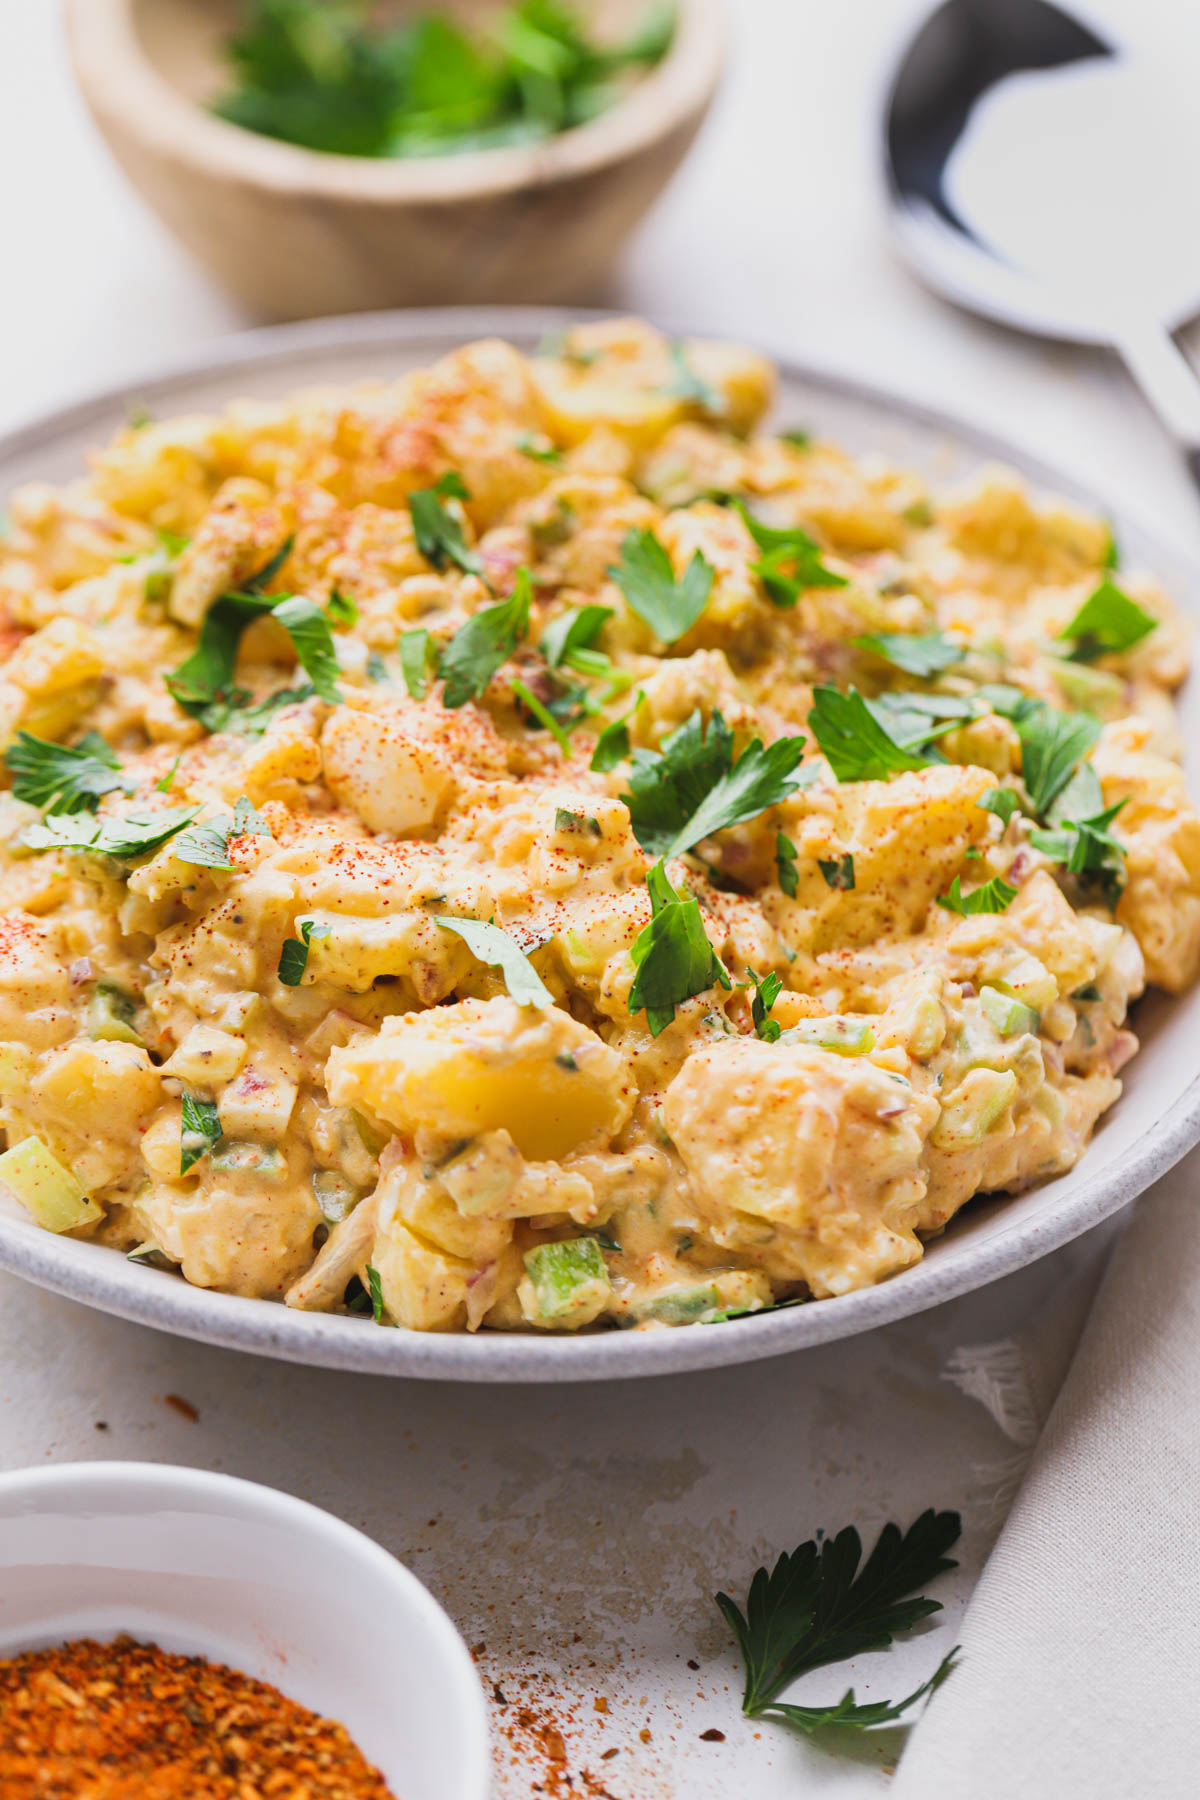 This cajun potato salad is made with chunky gold potatoes and a creamy dressing.  